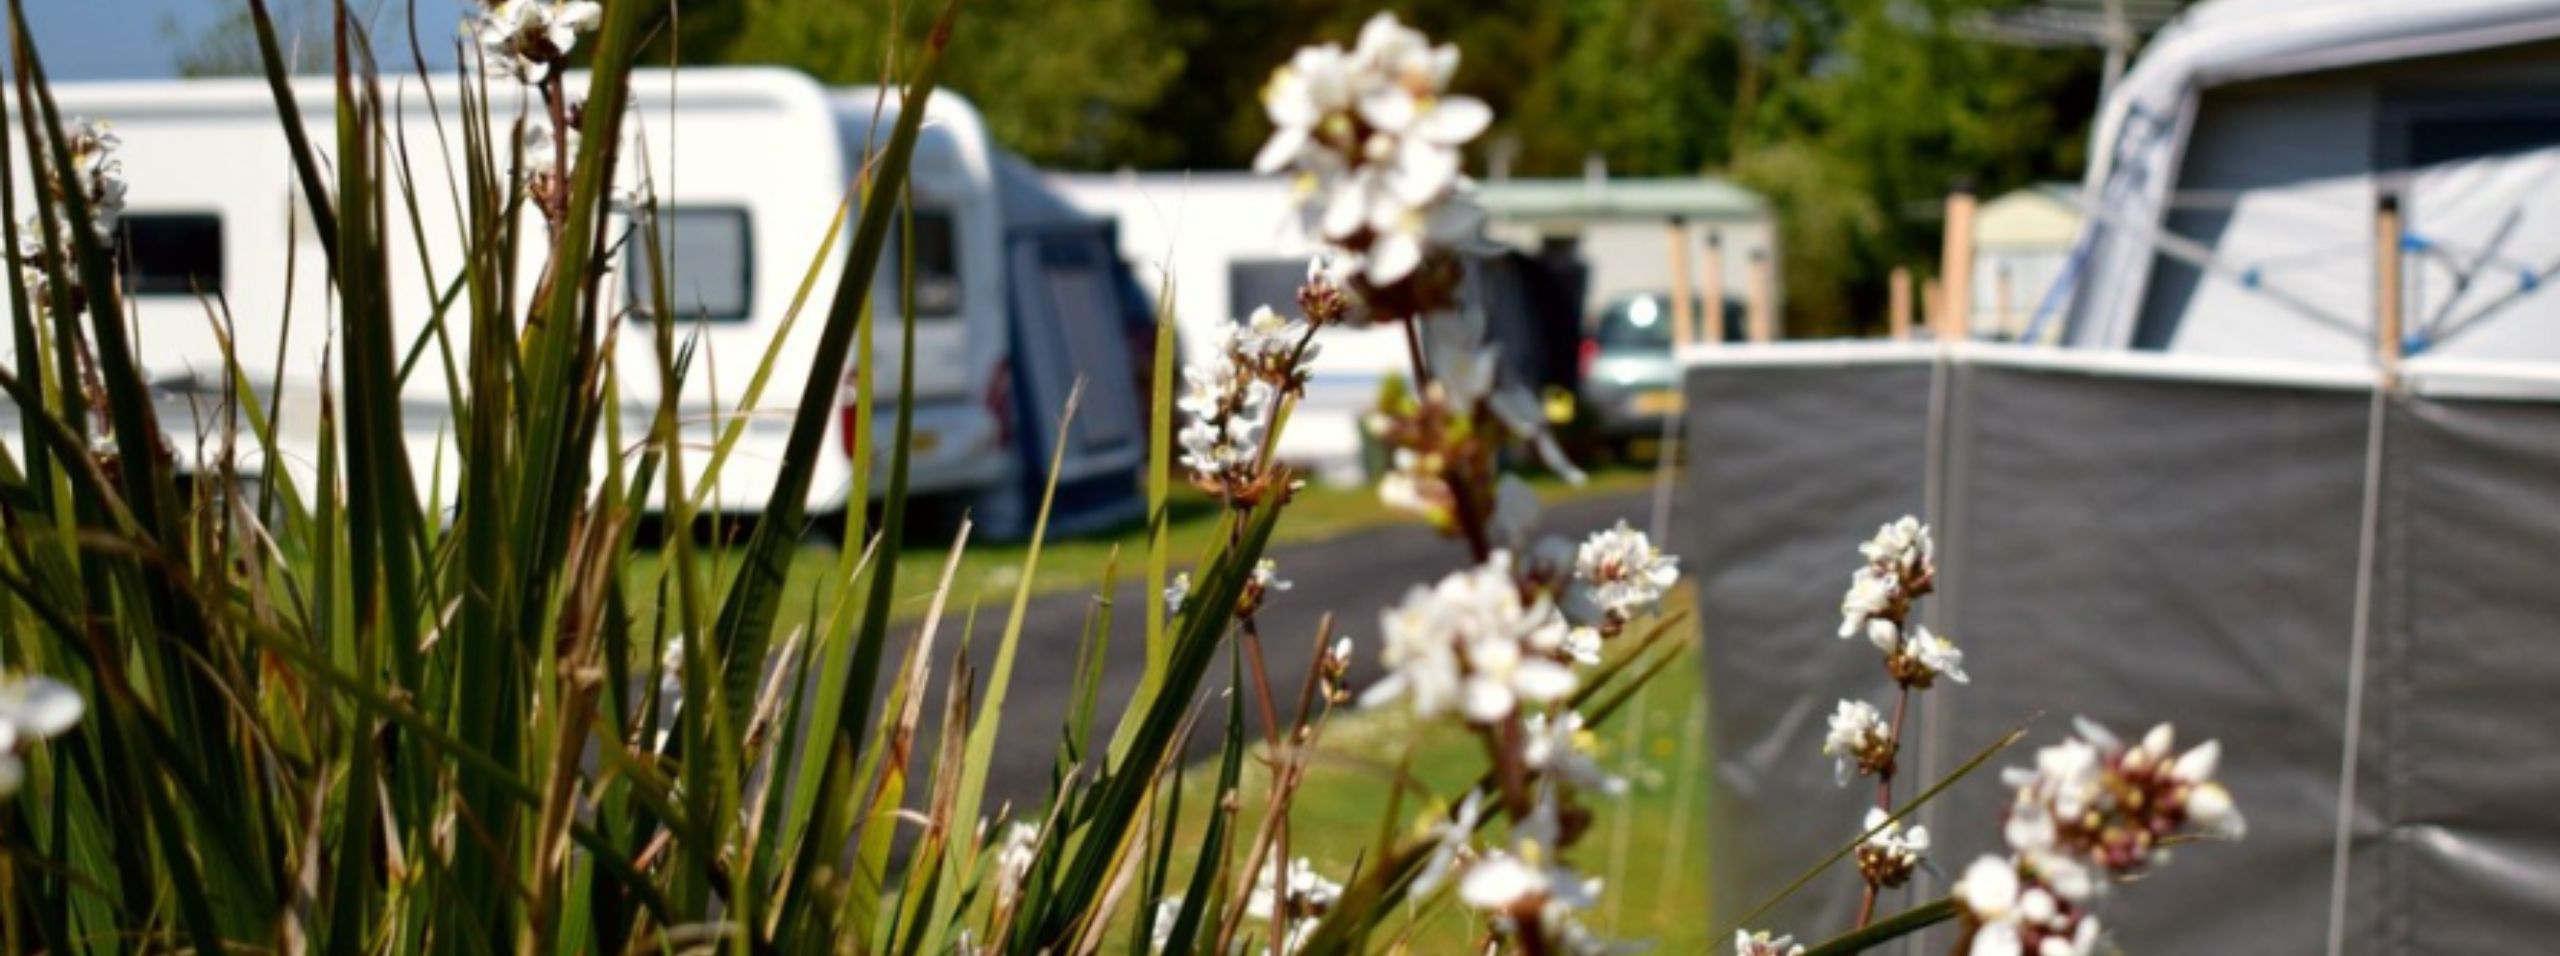 A scenic view of a luxury campsite at Monkey Tree, Cornwall with flowering plants in the foreground and several parked caravans blurred in the background under a clear sky.